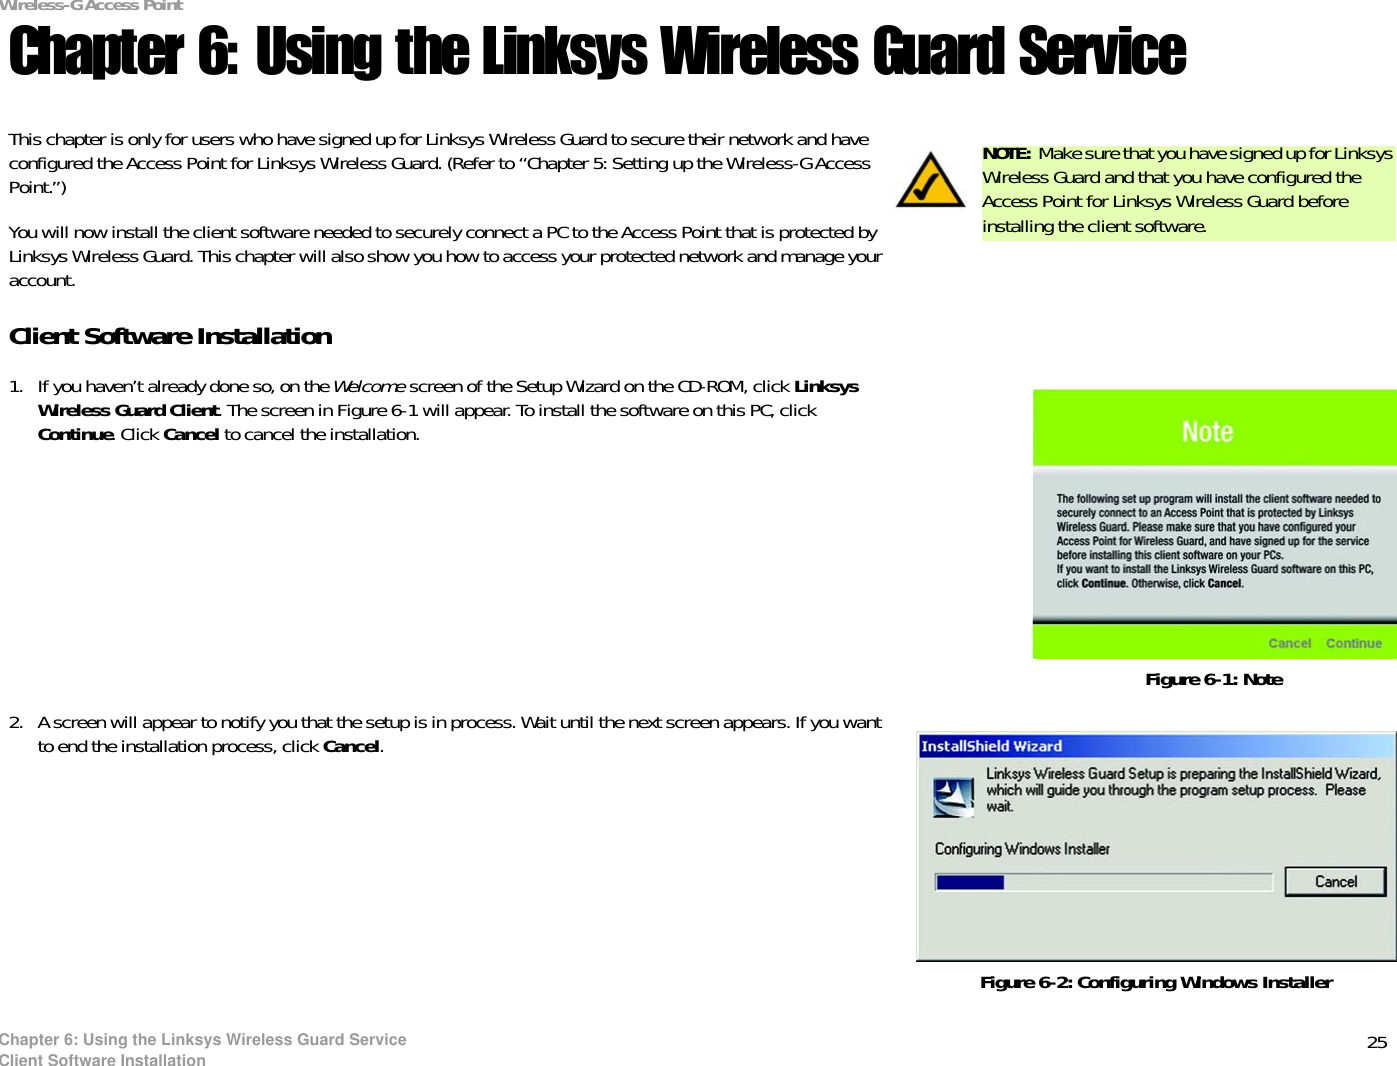 25Chapter 6: Using the Linksys Wireless Guard ServiceClient Software InstallationWireless-G Access PointChapter 6: Using the Linksys Wireless Guard ServiceThis chapter is only for users who have signed up for Linksys Wireless Guard to secure their network and have configured the Access Point for Linksys Wireless Guard. (Refer to “Chapter 5: Setting up the Wireless-G Access Point.”)You will now install the client software needed to securely connect a PC to the Access Point that is protected by Linksys Wireless Guard. This chapter will also show you how to access your protected network and manage your account.Client Software Installation1. If you haven’t already done so, on the Welcome screen of the Setup Wizard on the CD-ROM, click LinksysWireless Guard Client. The screen in Figure 6-1 will appear. To install the software on this PC, click Continue. Click Cancel to cancel the installation.2. A screen will appear to notify you that the setup is in process. Wait until the next screen appears. If you want to end the installation process, click Cancel.Figure 6-1: NoteNOTE: Make sure that you have signed up for Linksys Wireless Guard and that you have configured the Access Point for Linksys Wireless Guard before installing the client software.Figure 6-2: Configuring Windows Installer